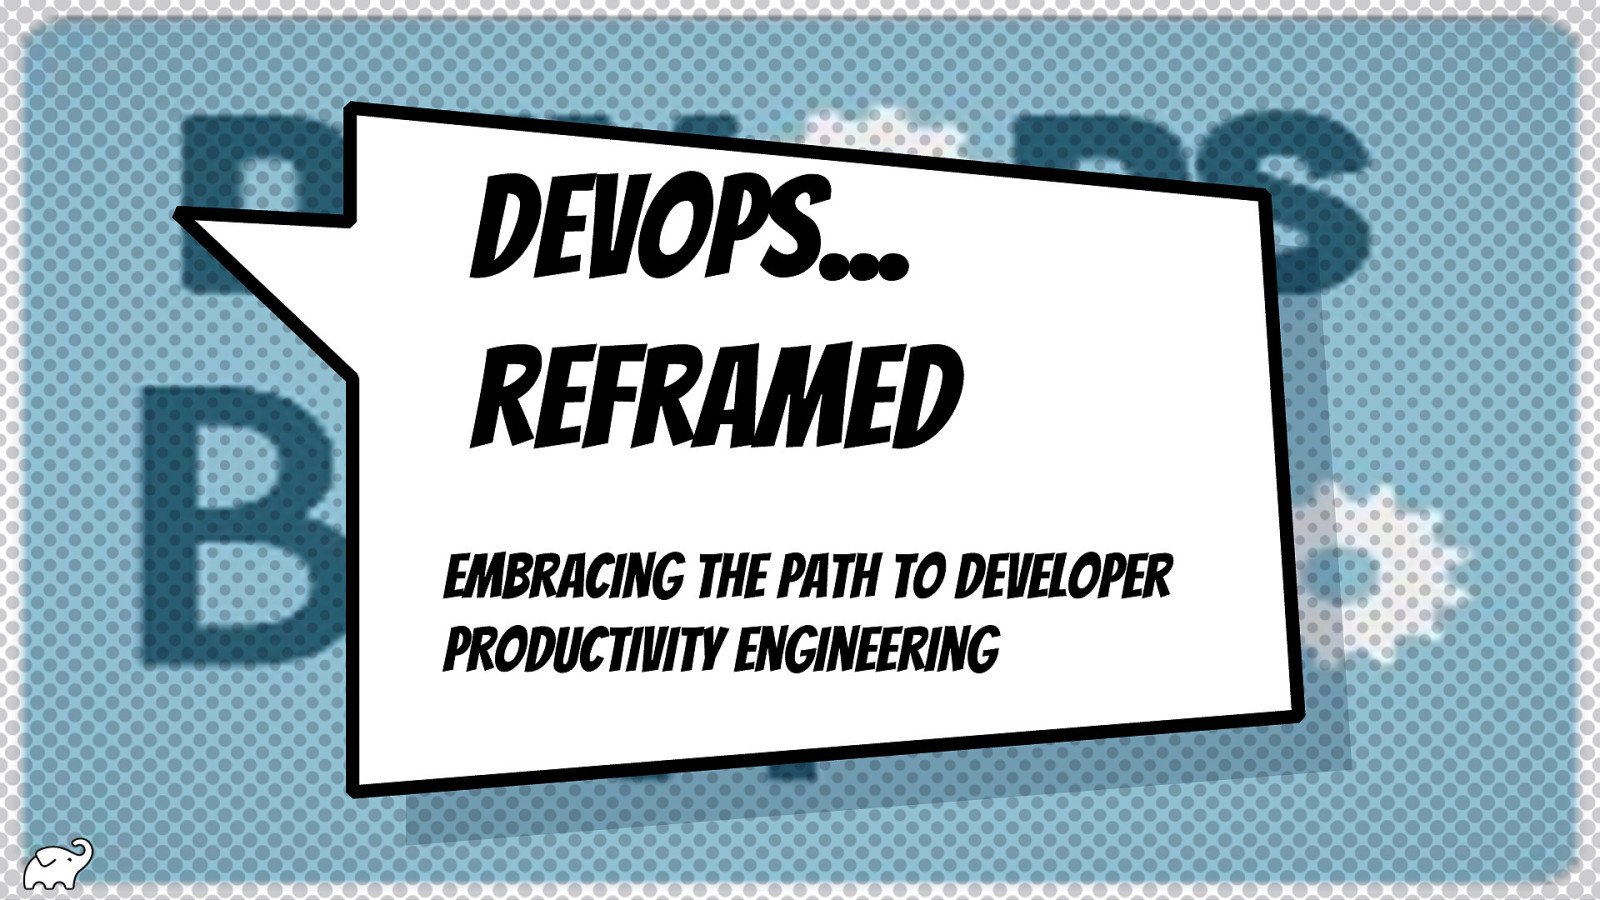 DevOps Reframed: Embracing the Path to Developer Productivity Engineering by Baruch Sadogursky